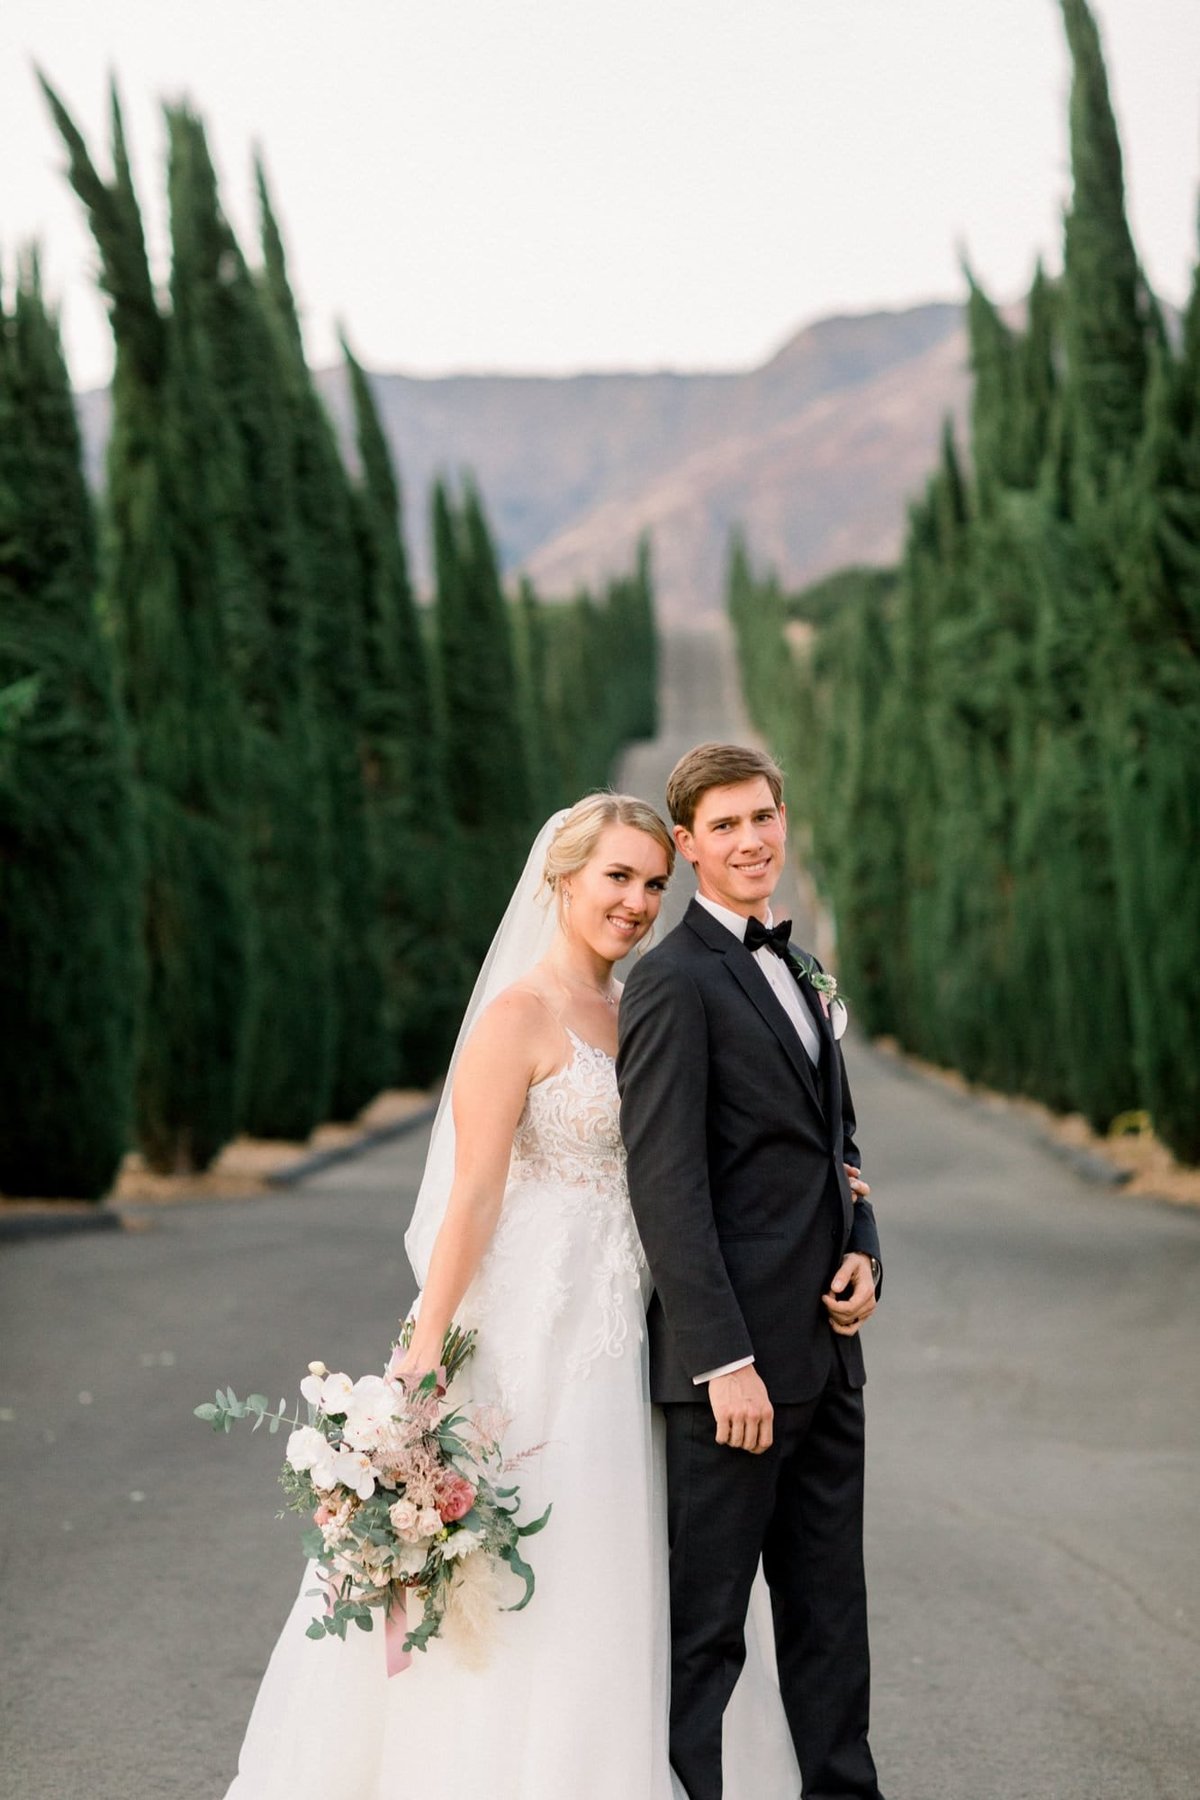 Bride and Groom pose together on a road between many tall bushes